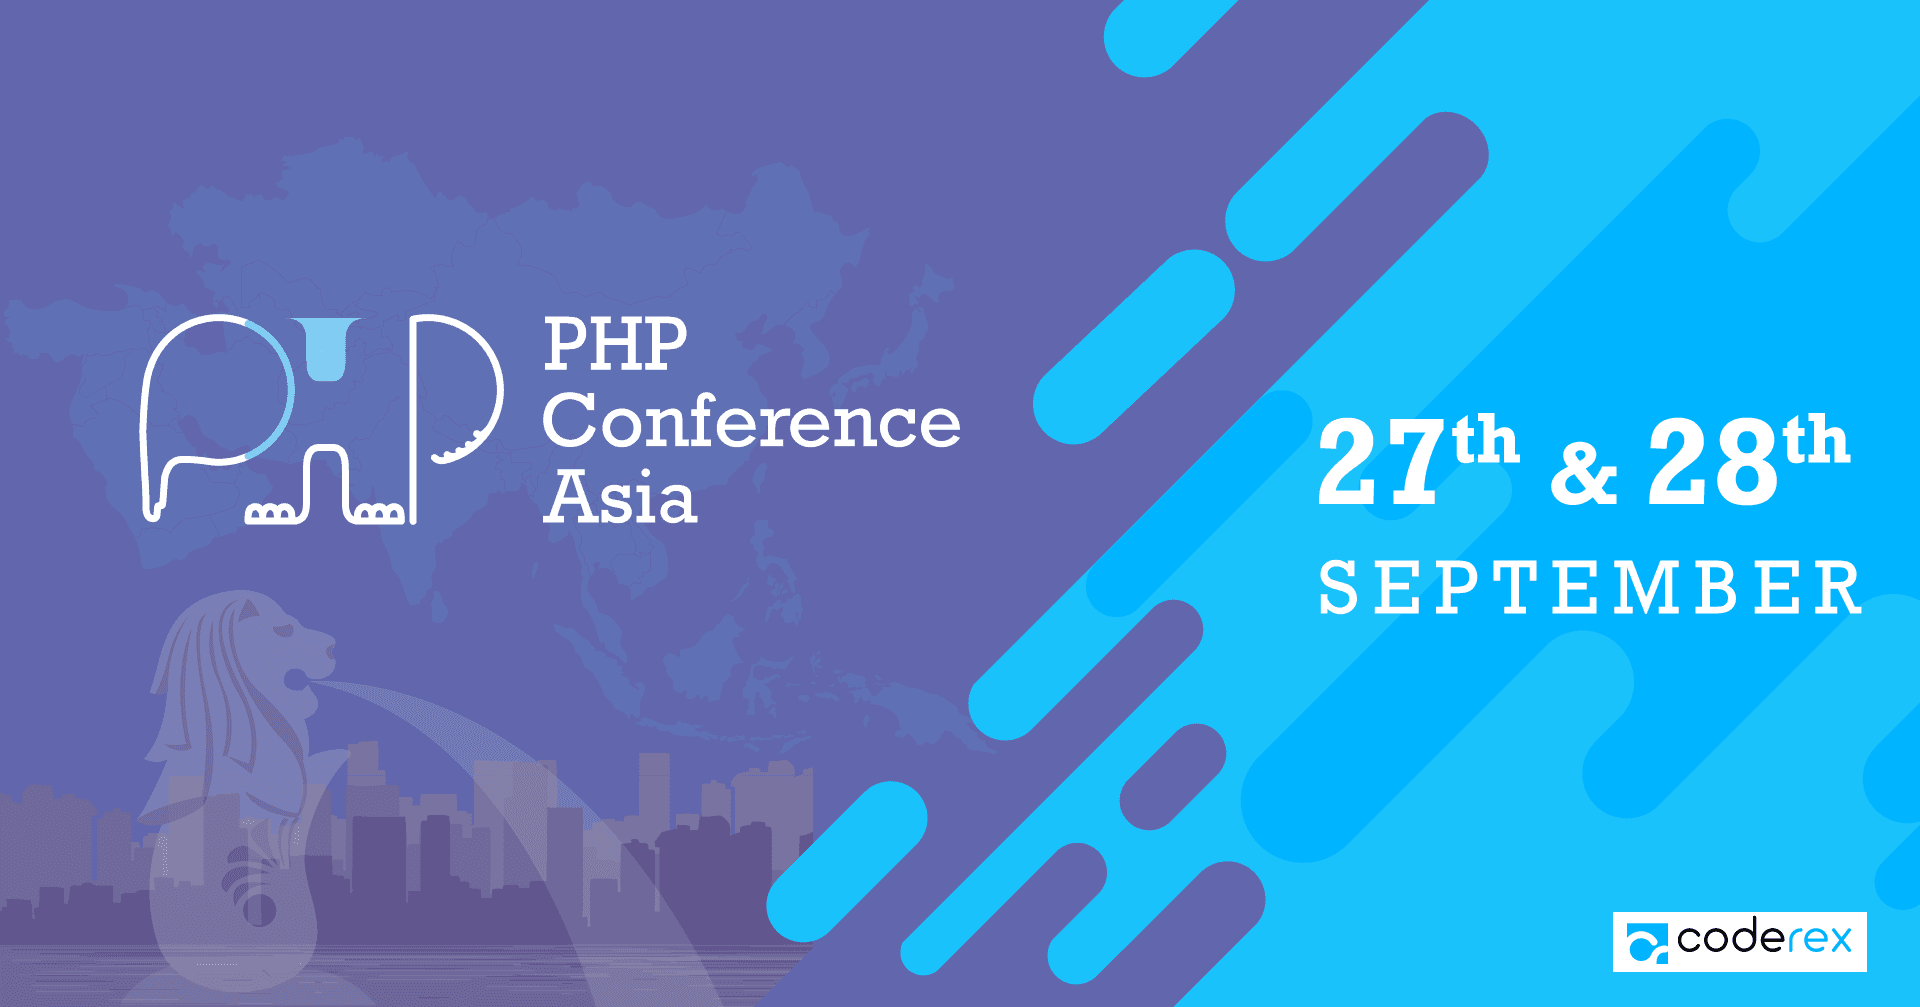 PHP Conference Asia 2018 — CodeRex Is Silver Sponsor